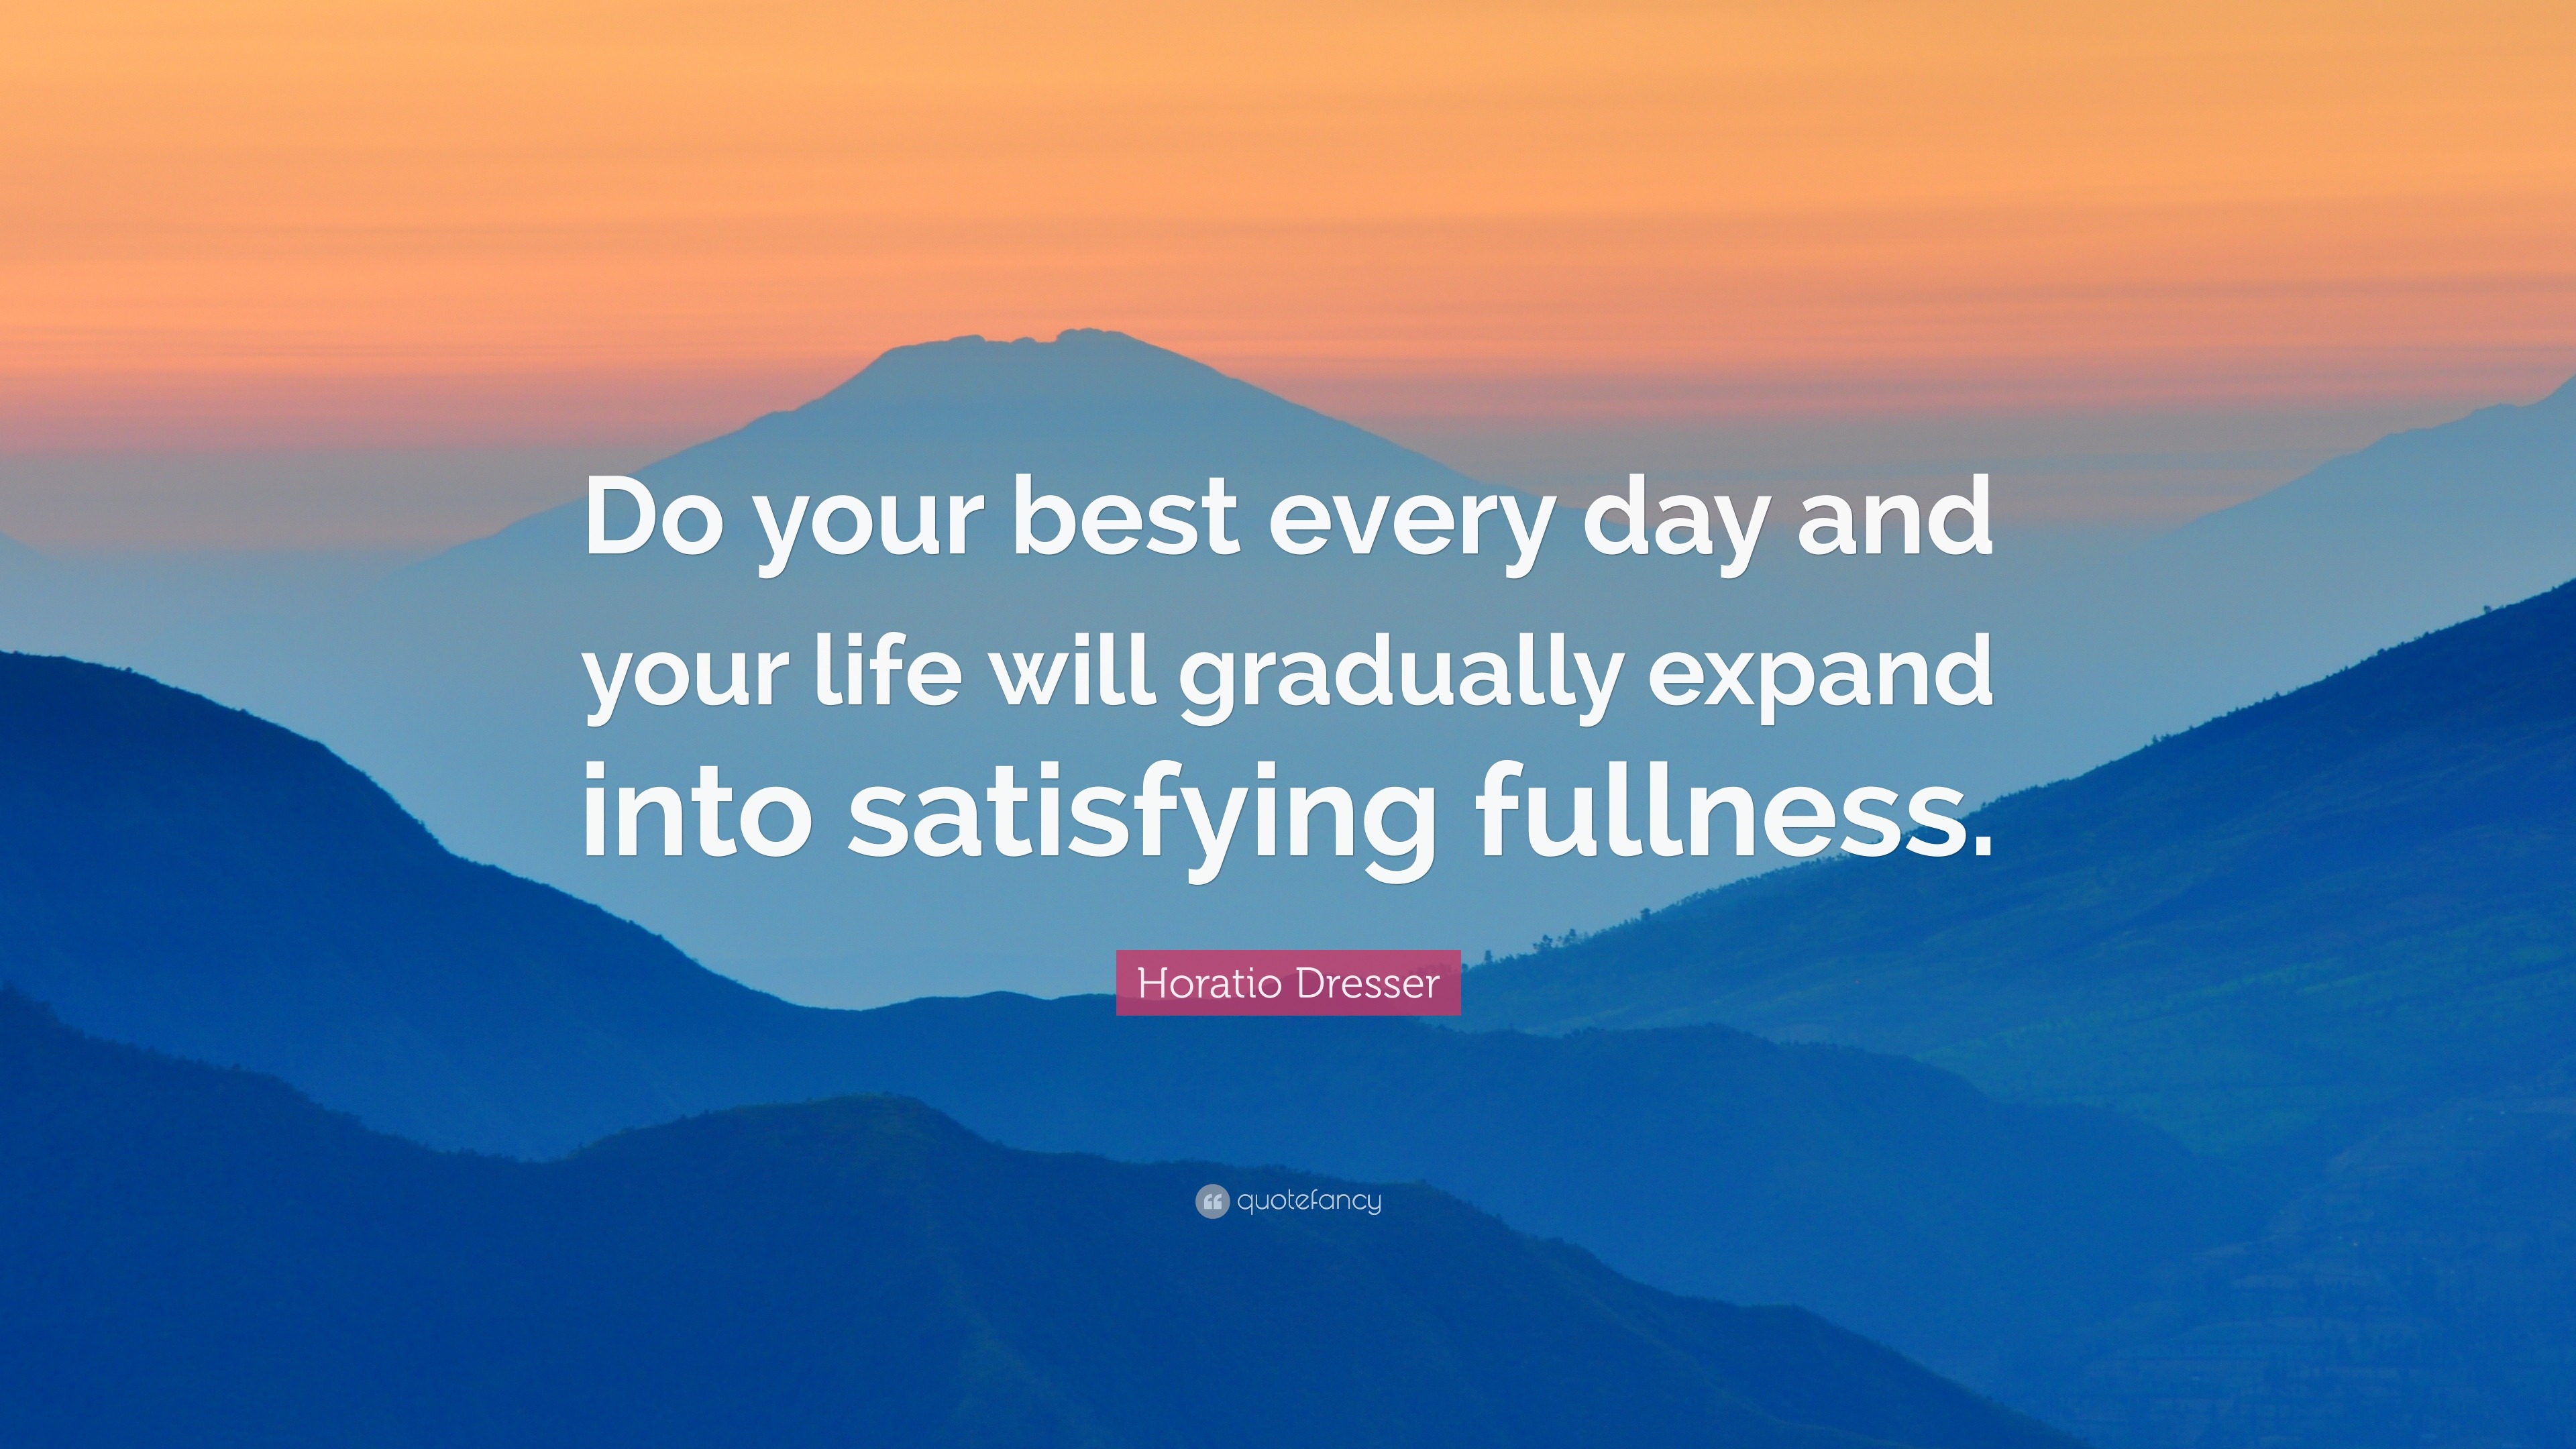 Horatio Dresser Quote: “Do your best every day and your life will ...